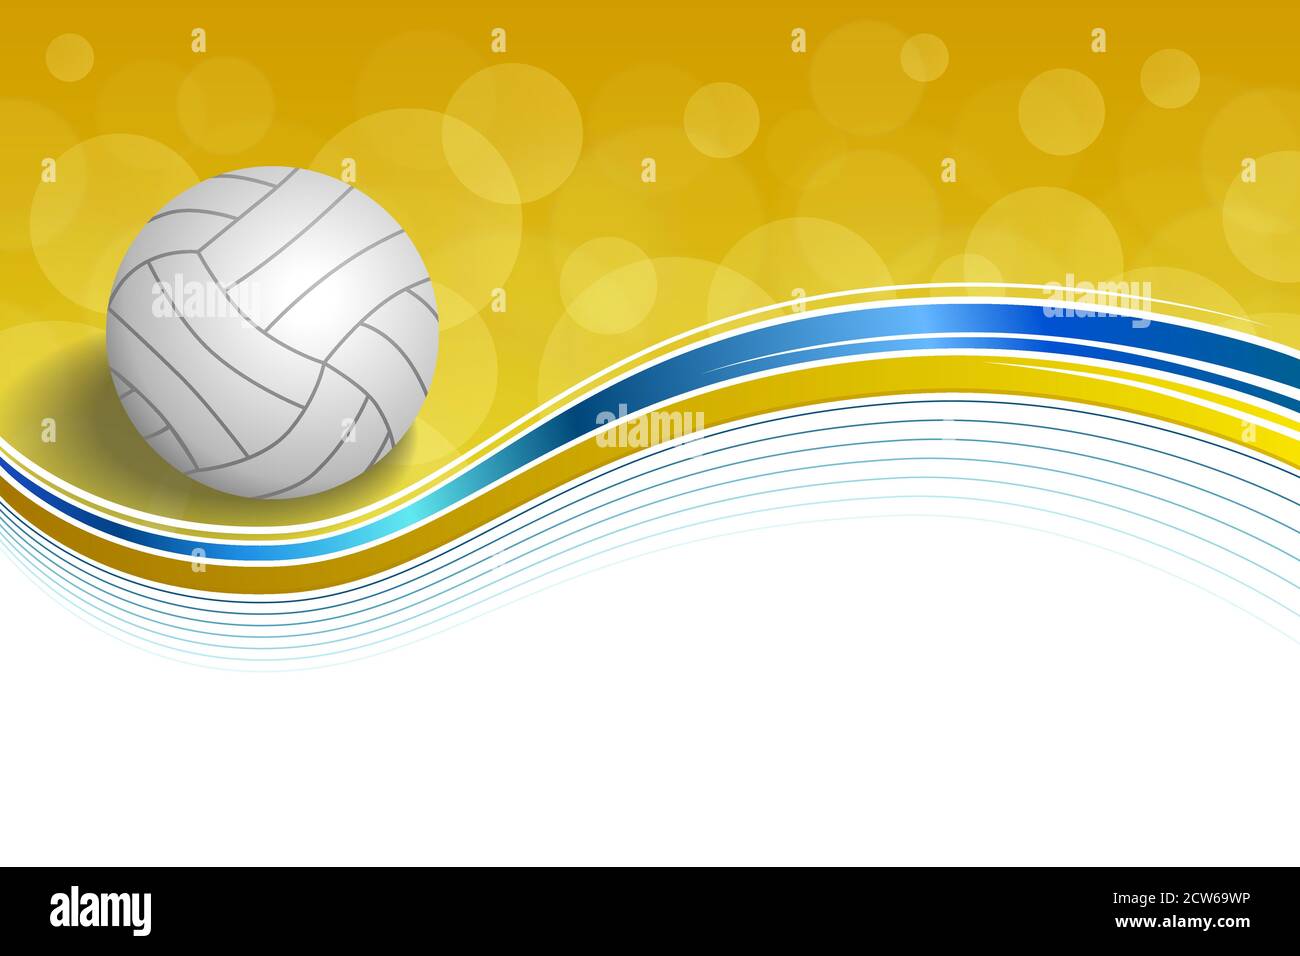 Background abstract sport volleyball blue yellow ball frame ...